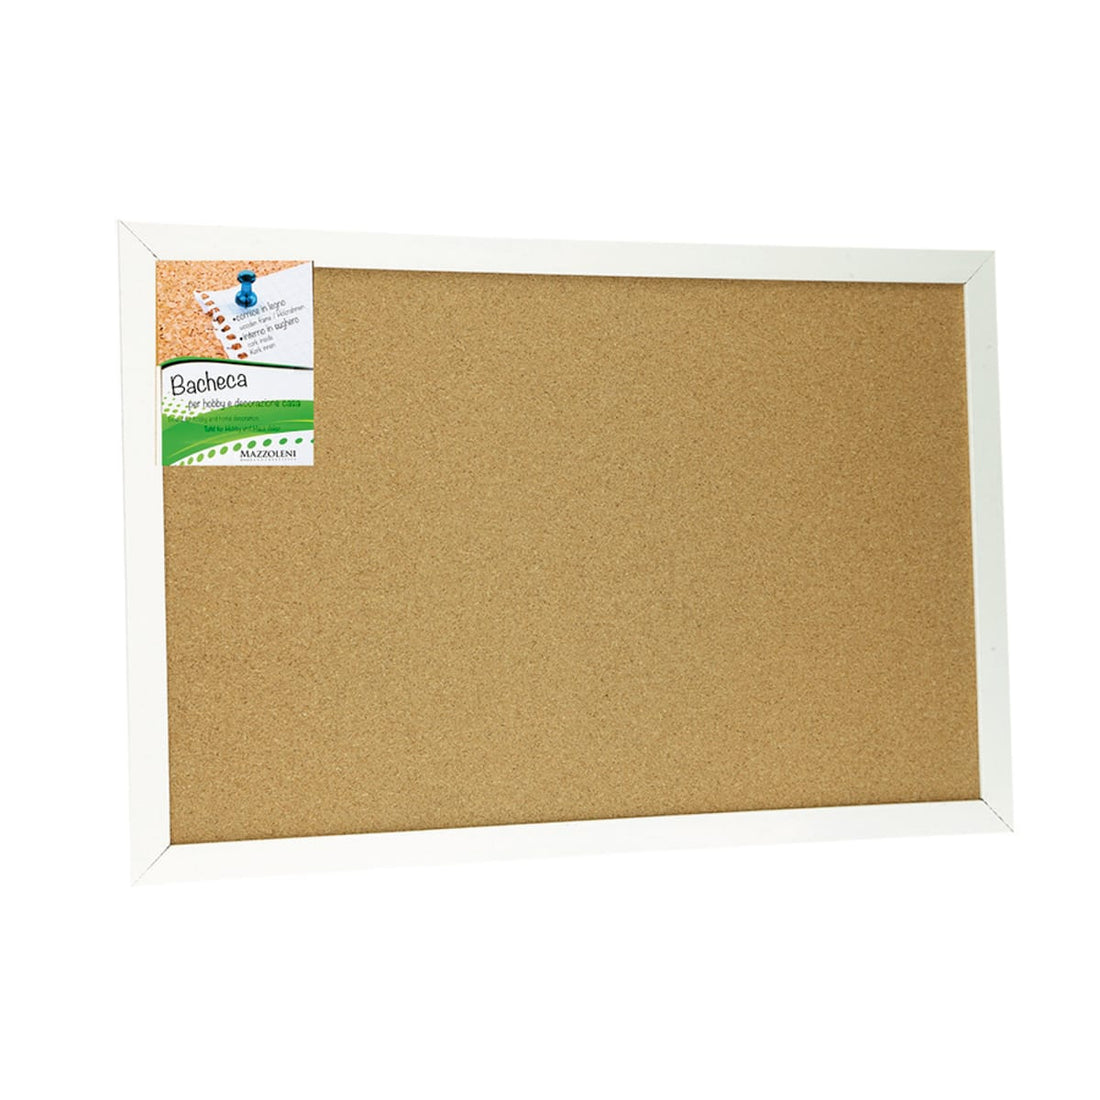 60X90 CM CORK NOTICE BOARD WITH WHITE WOODEN FRAME